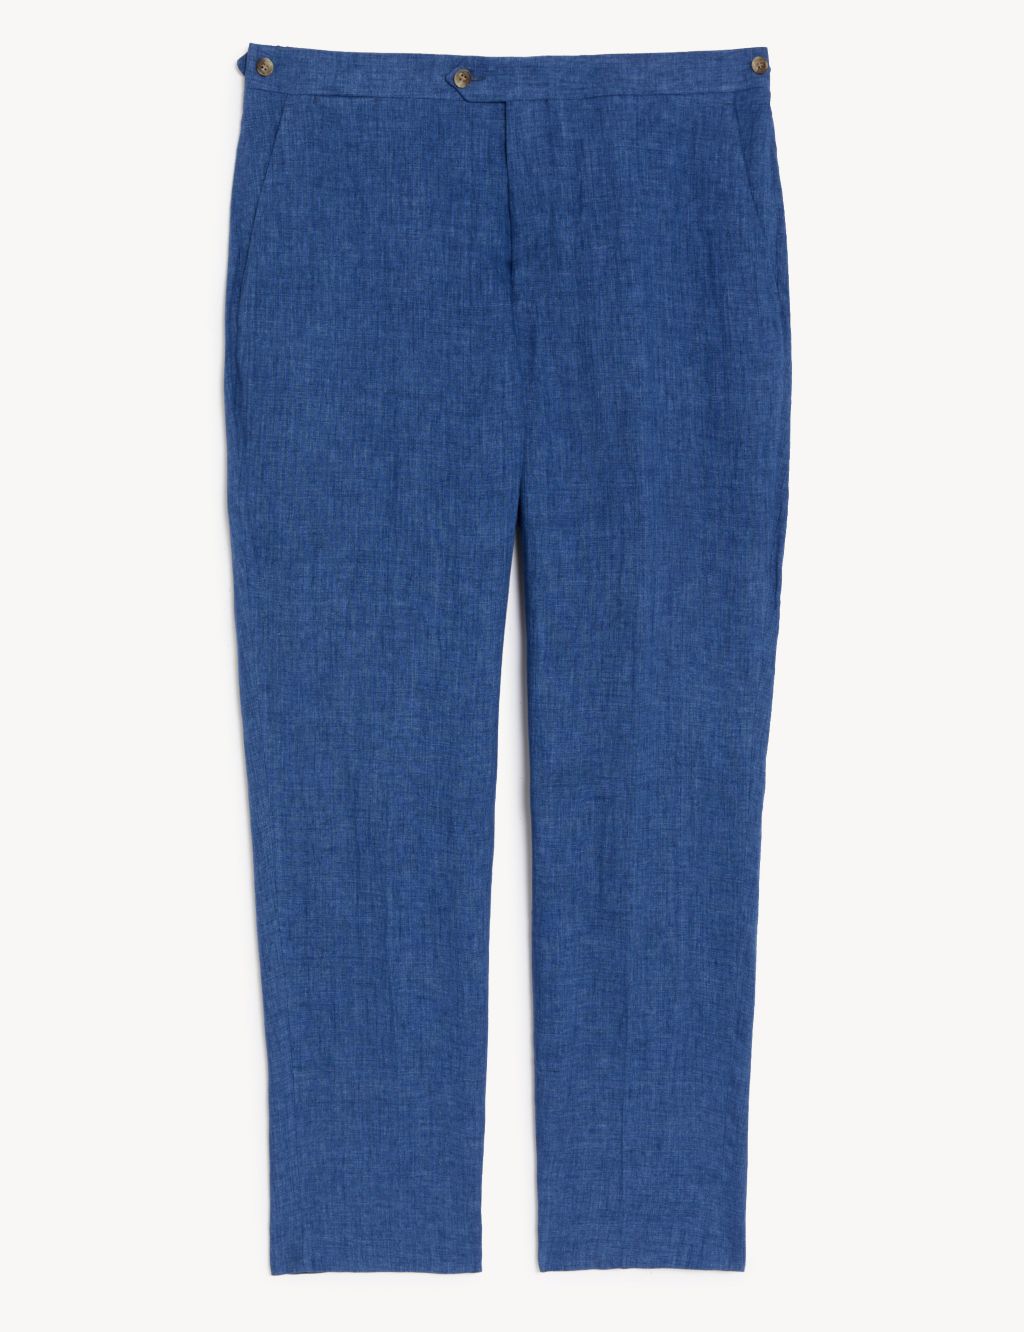 Tailored Fit Pure Linen Flat Front Trousers image 2